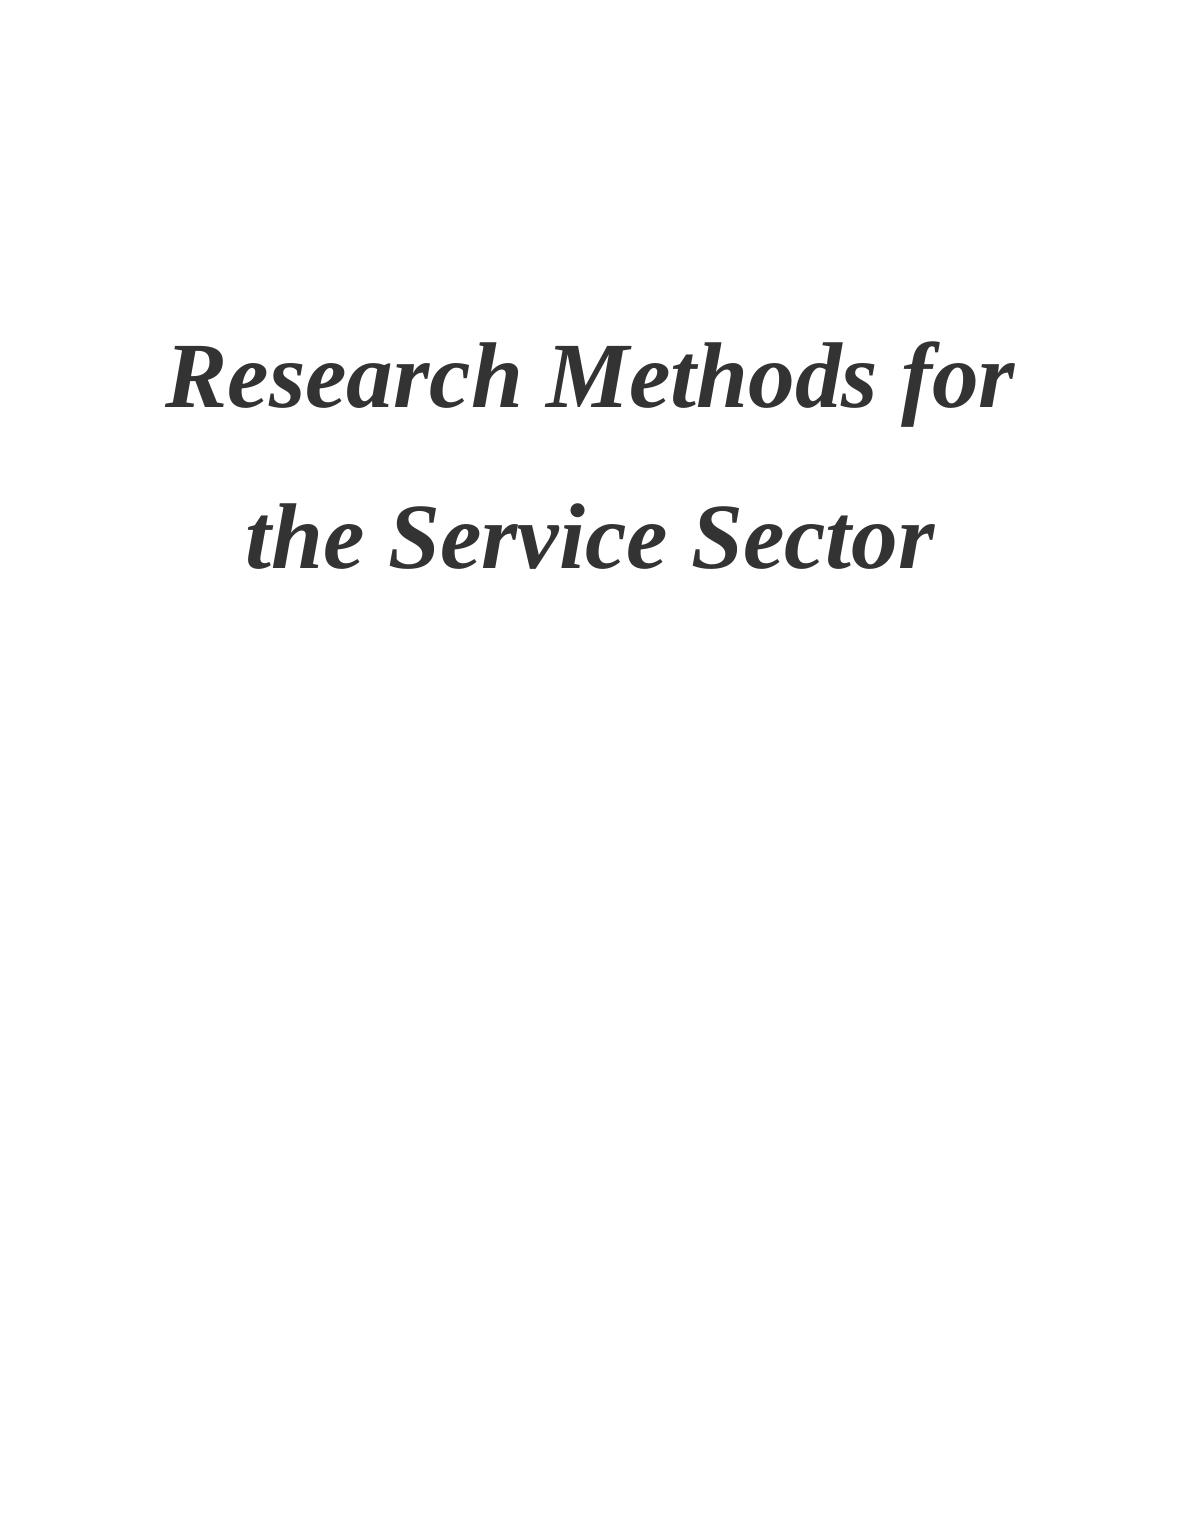 Research Methods for the Service Sector_1